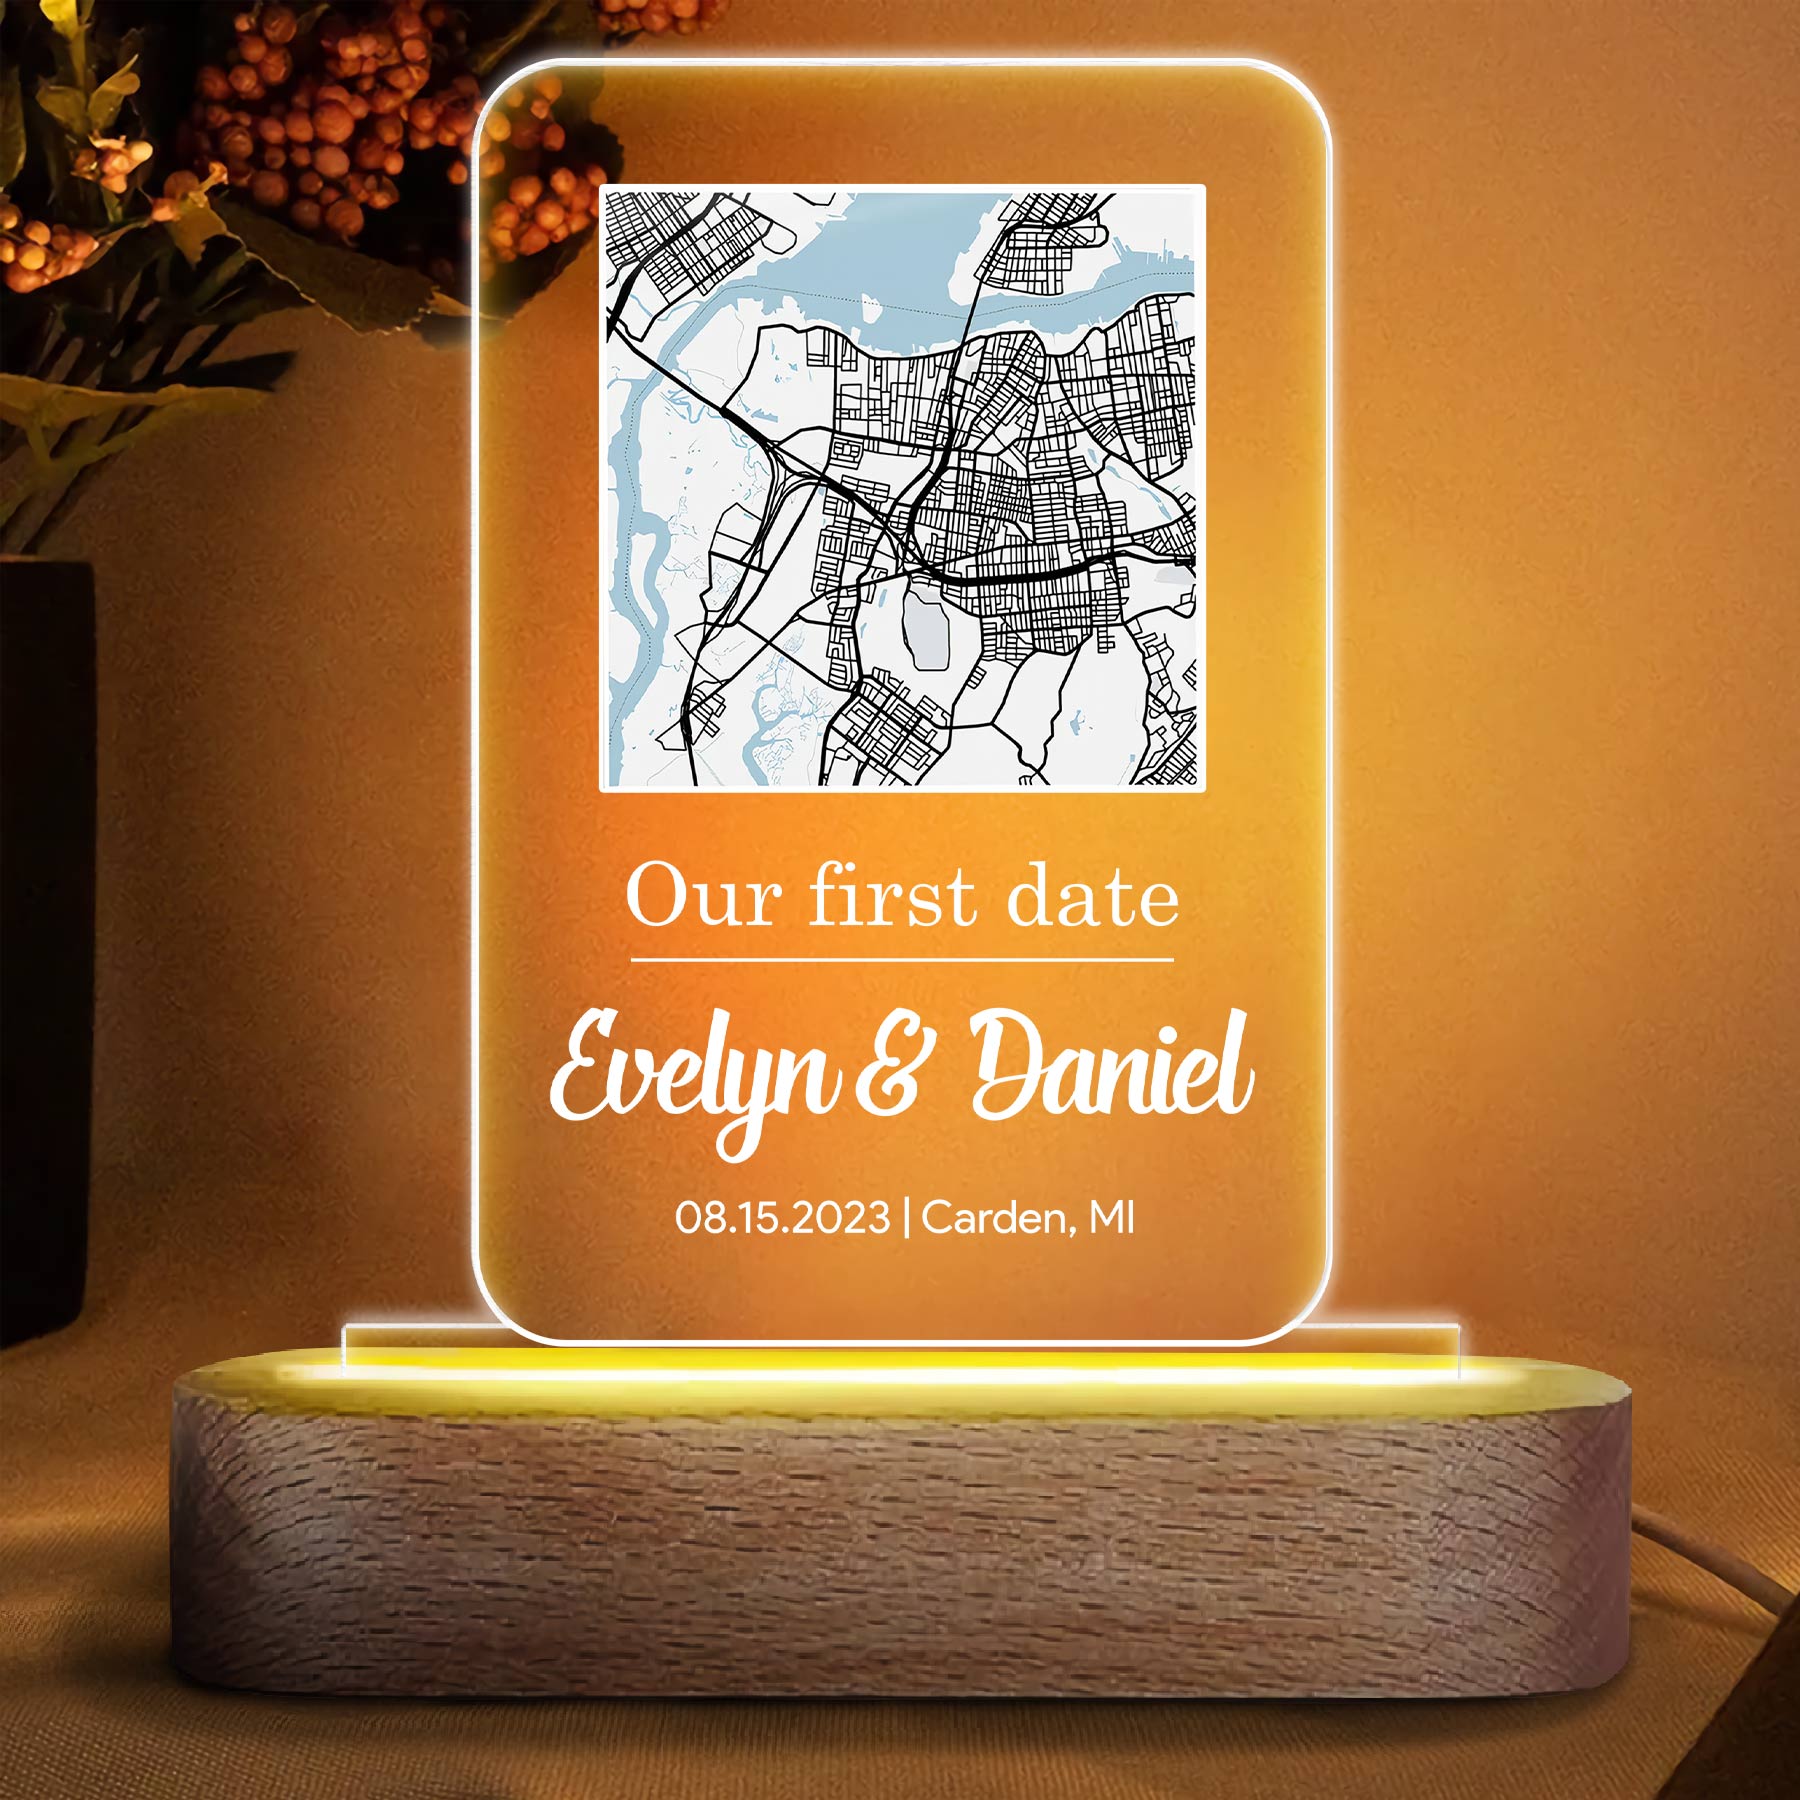 Our First Date Map - Personalized Custom Acrylic LED Night Light - Gift For Couple, Husband, Wife, Girlfriend, Boyfriend